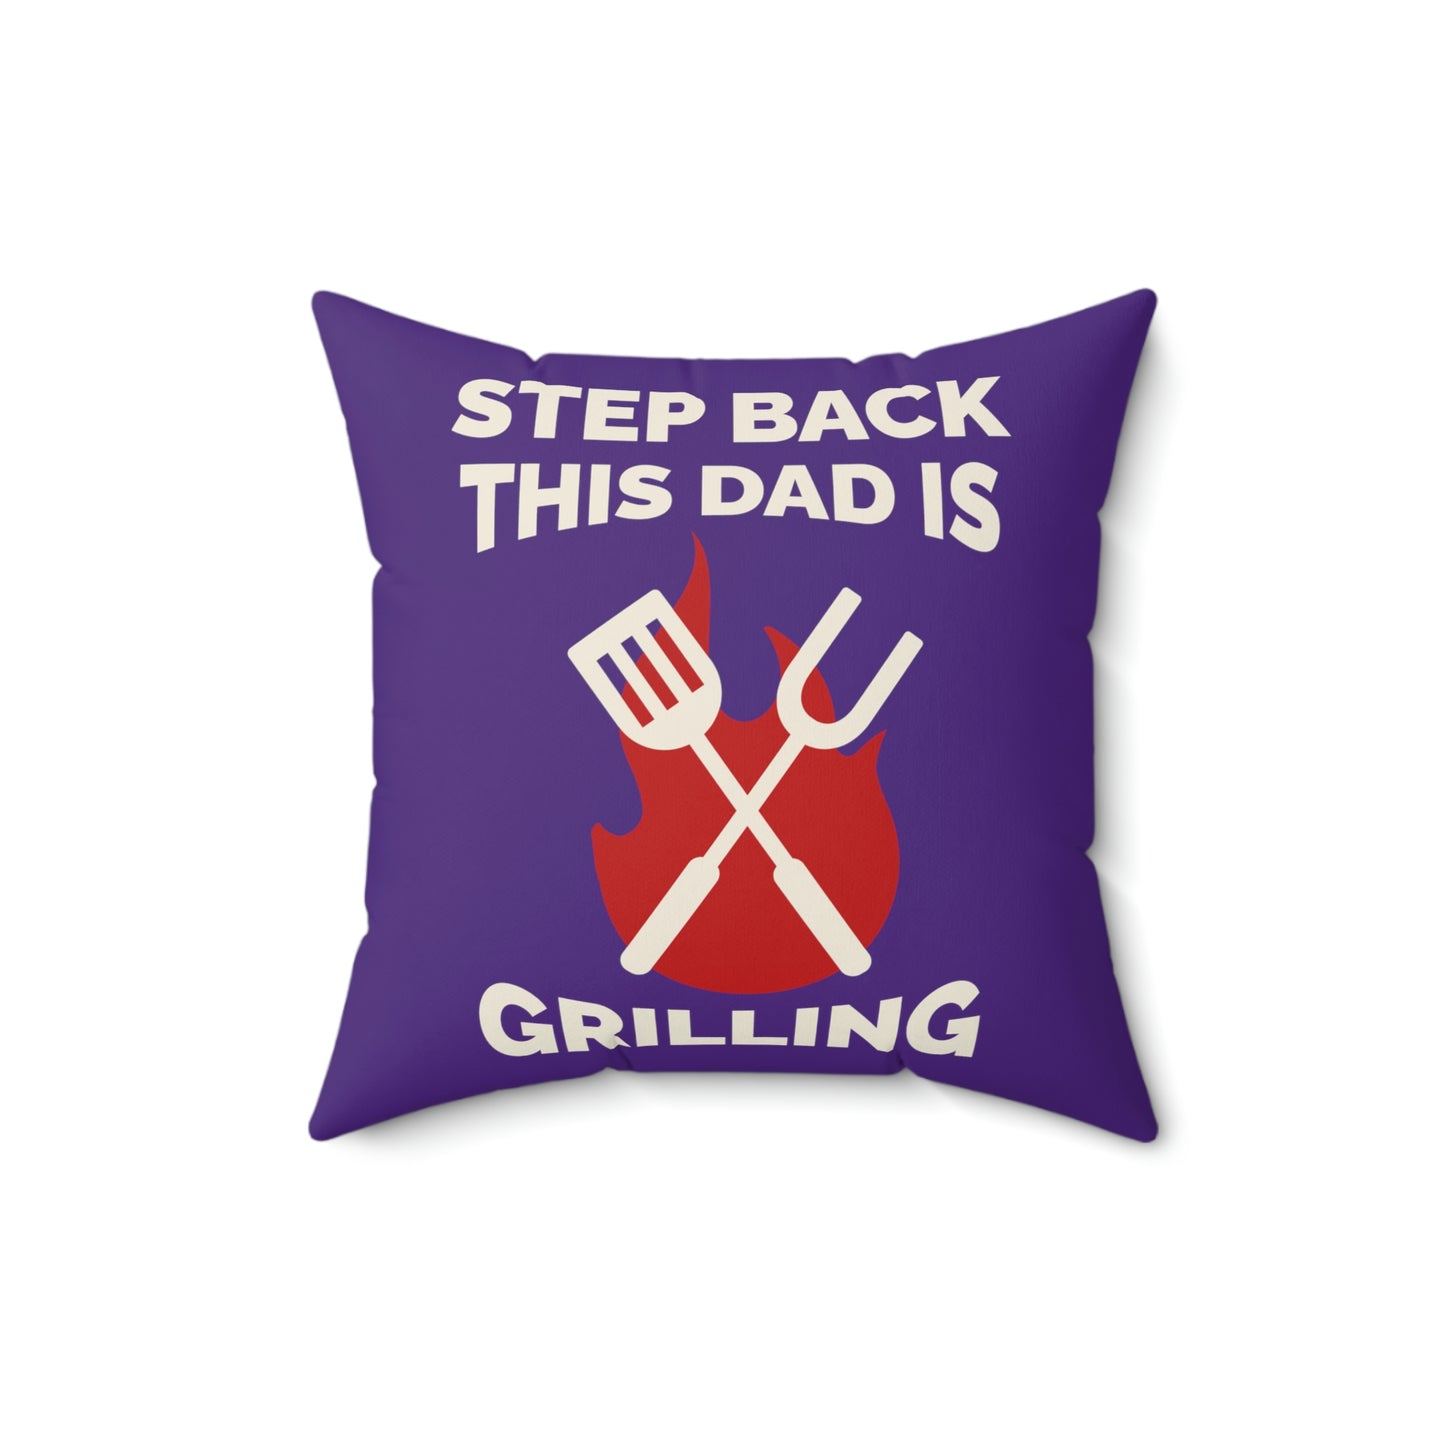 Spun Polyester Square Pillow Case "Step Back This Dad Is Grilling on Purple”